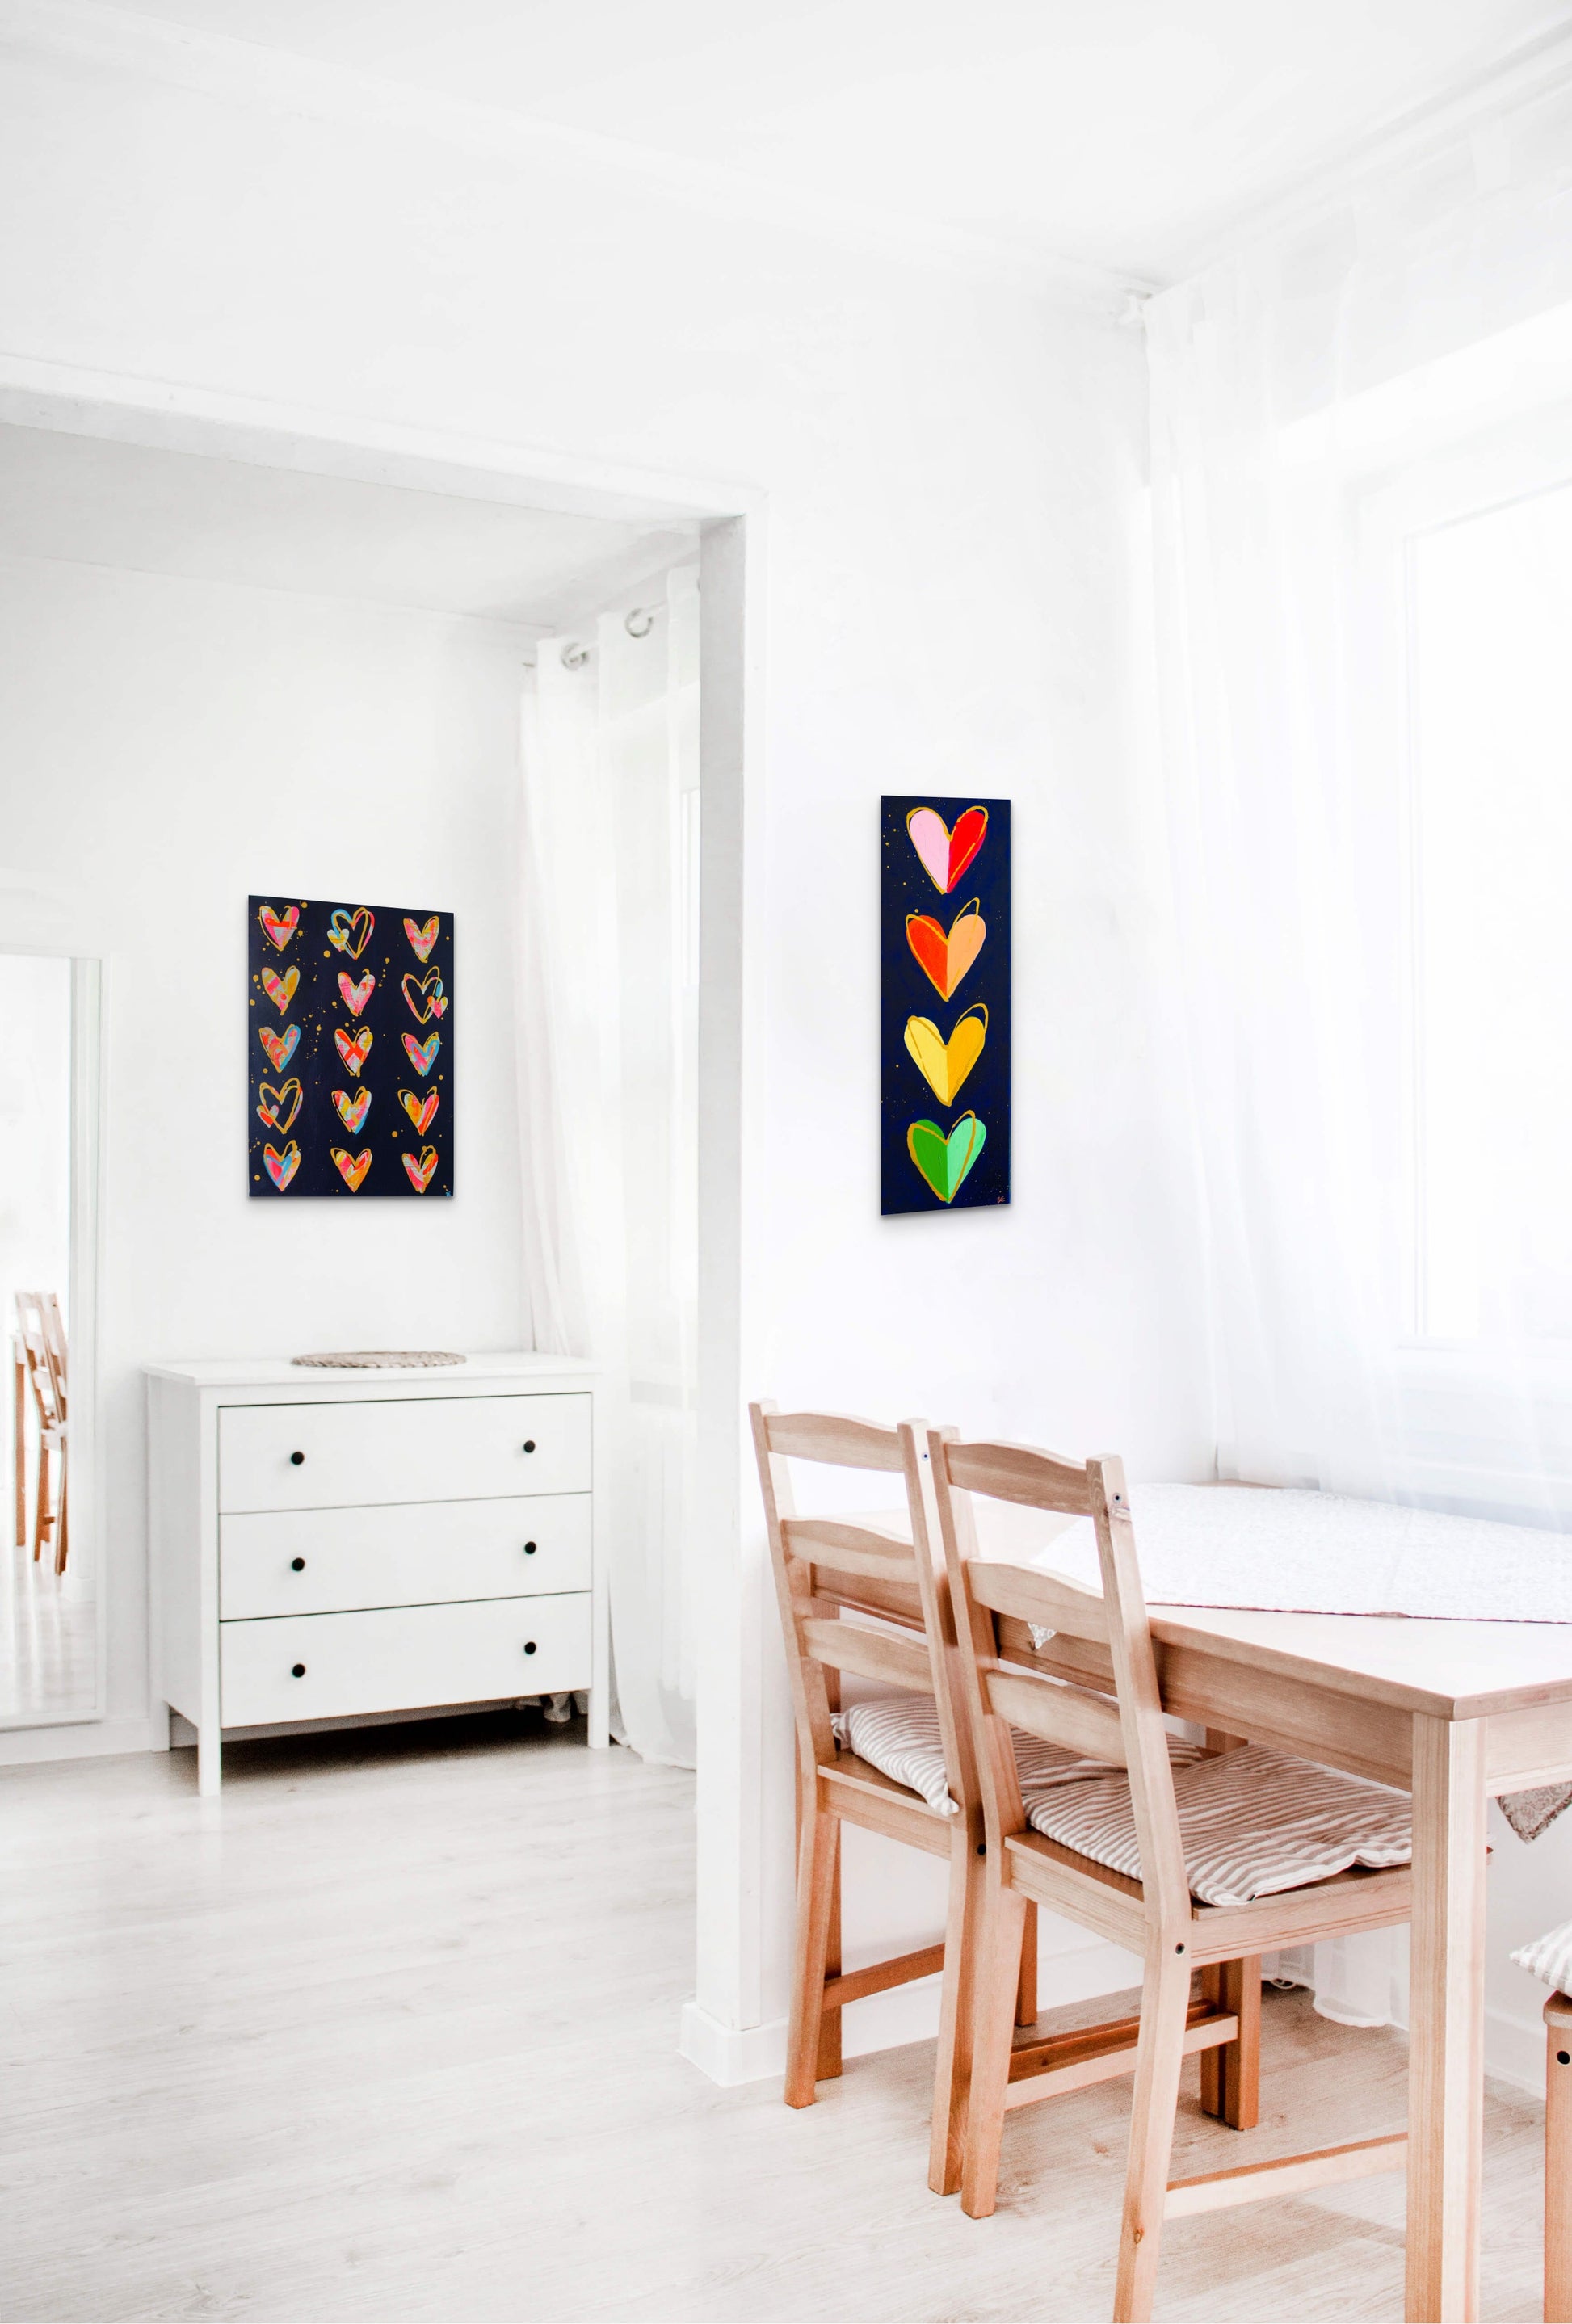 Two paintings with hearts from Bridget Edwards Studio hang on white walls in clean, modern house. Art work for sale.